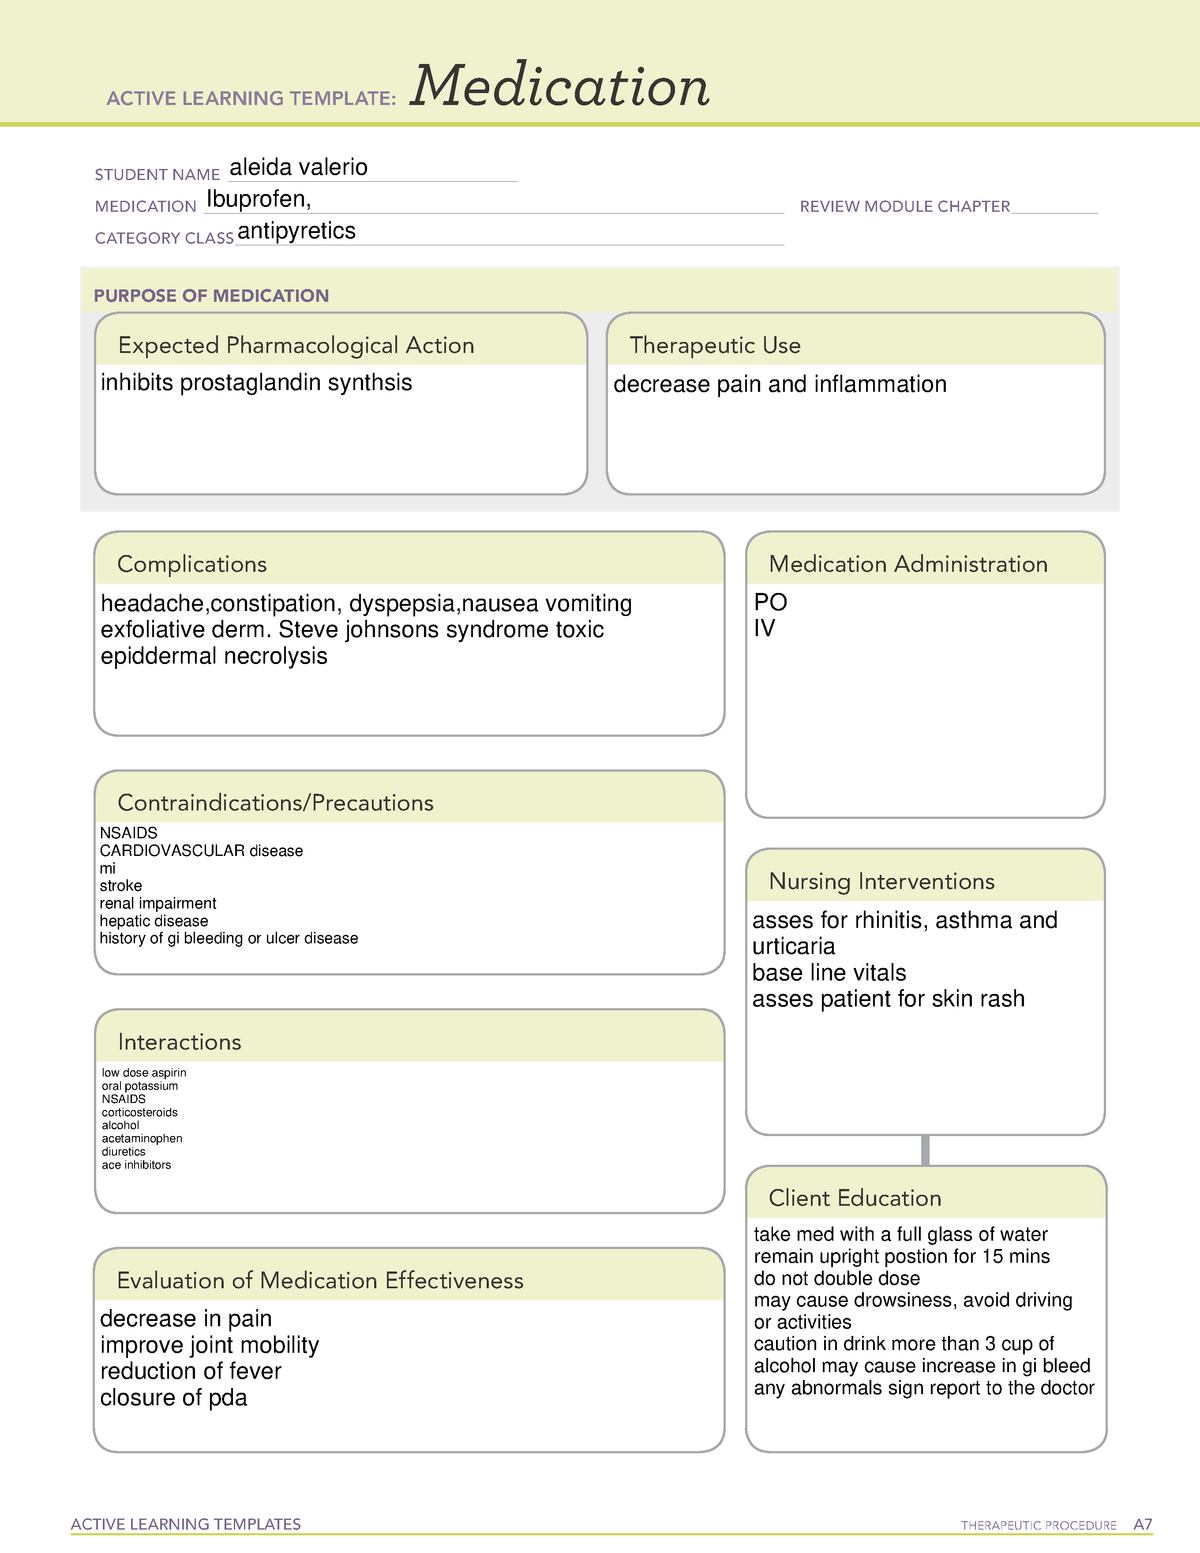 Active Learning Template medication hydrocodone ACTIVE LEARNING